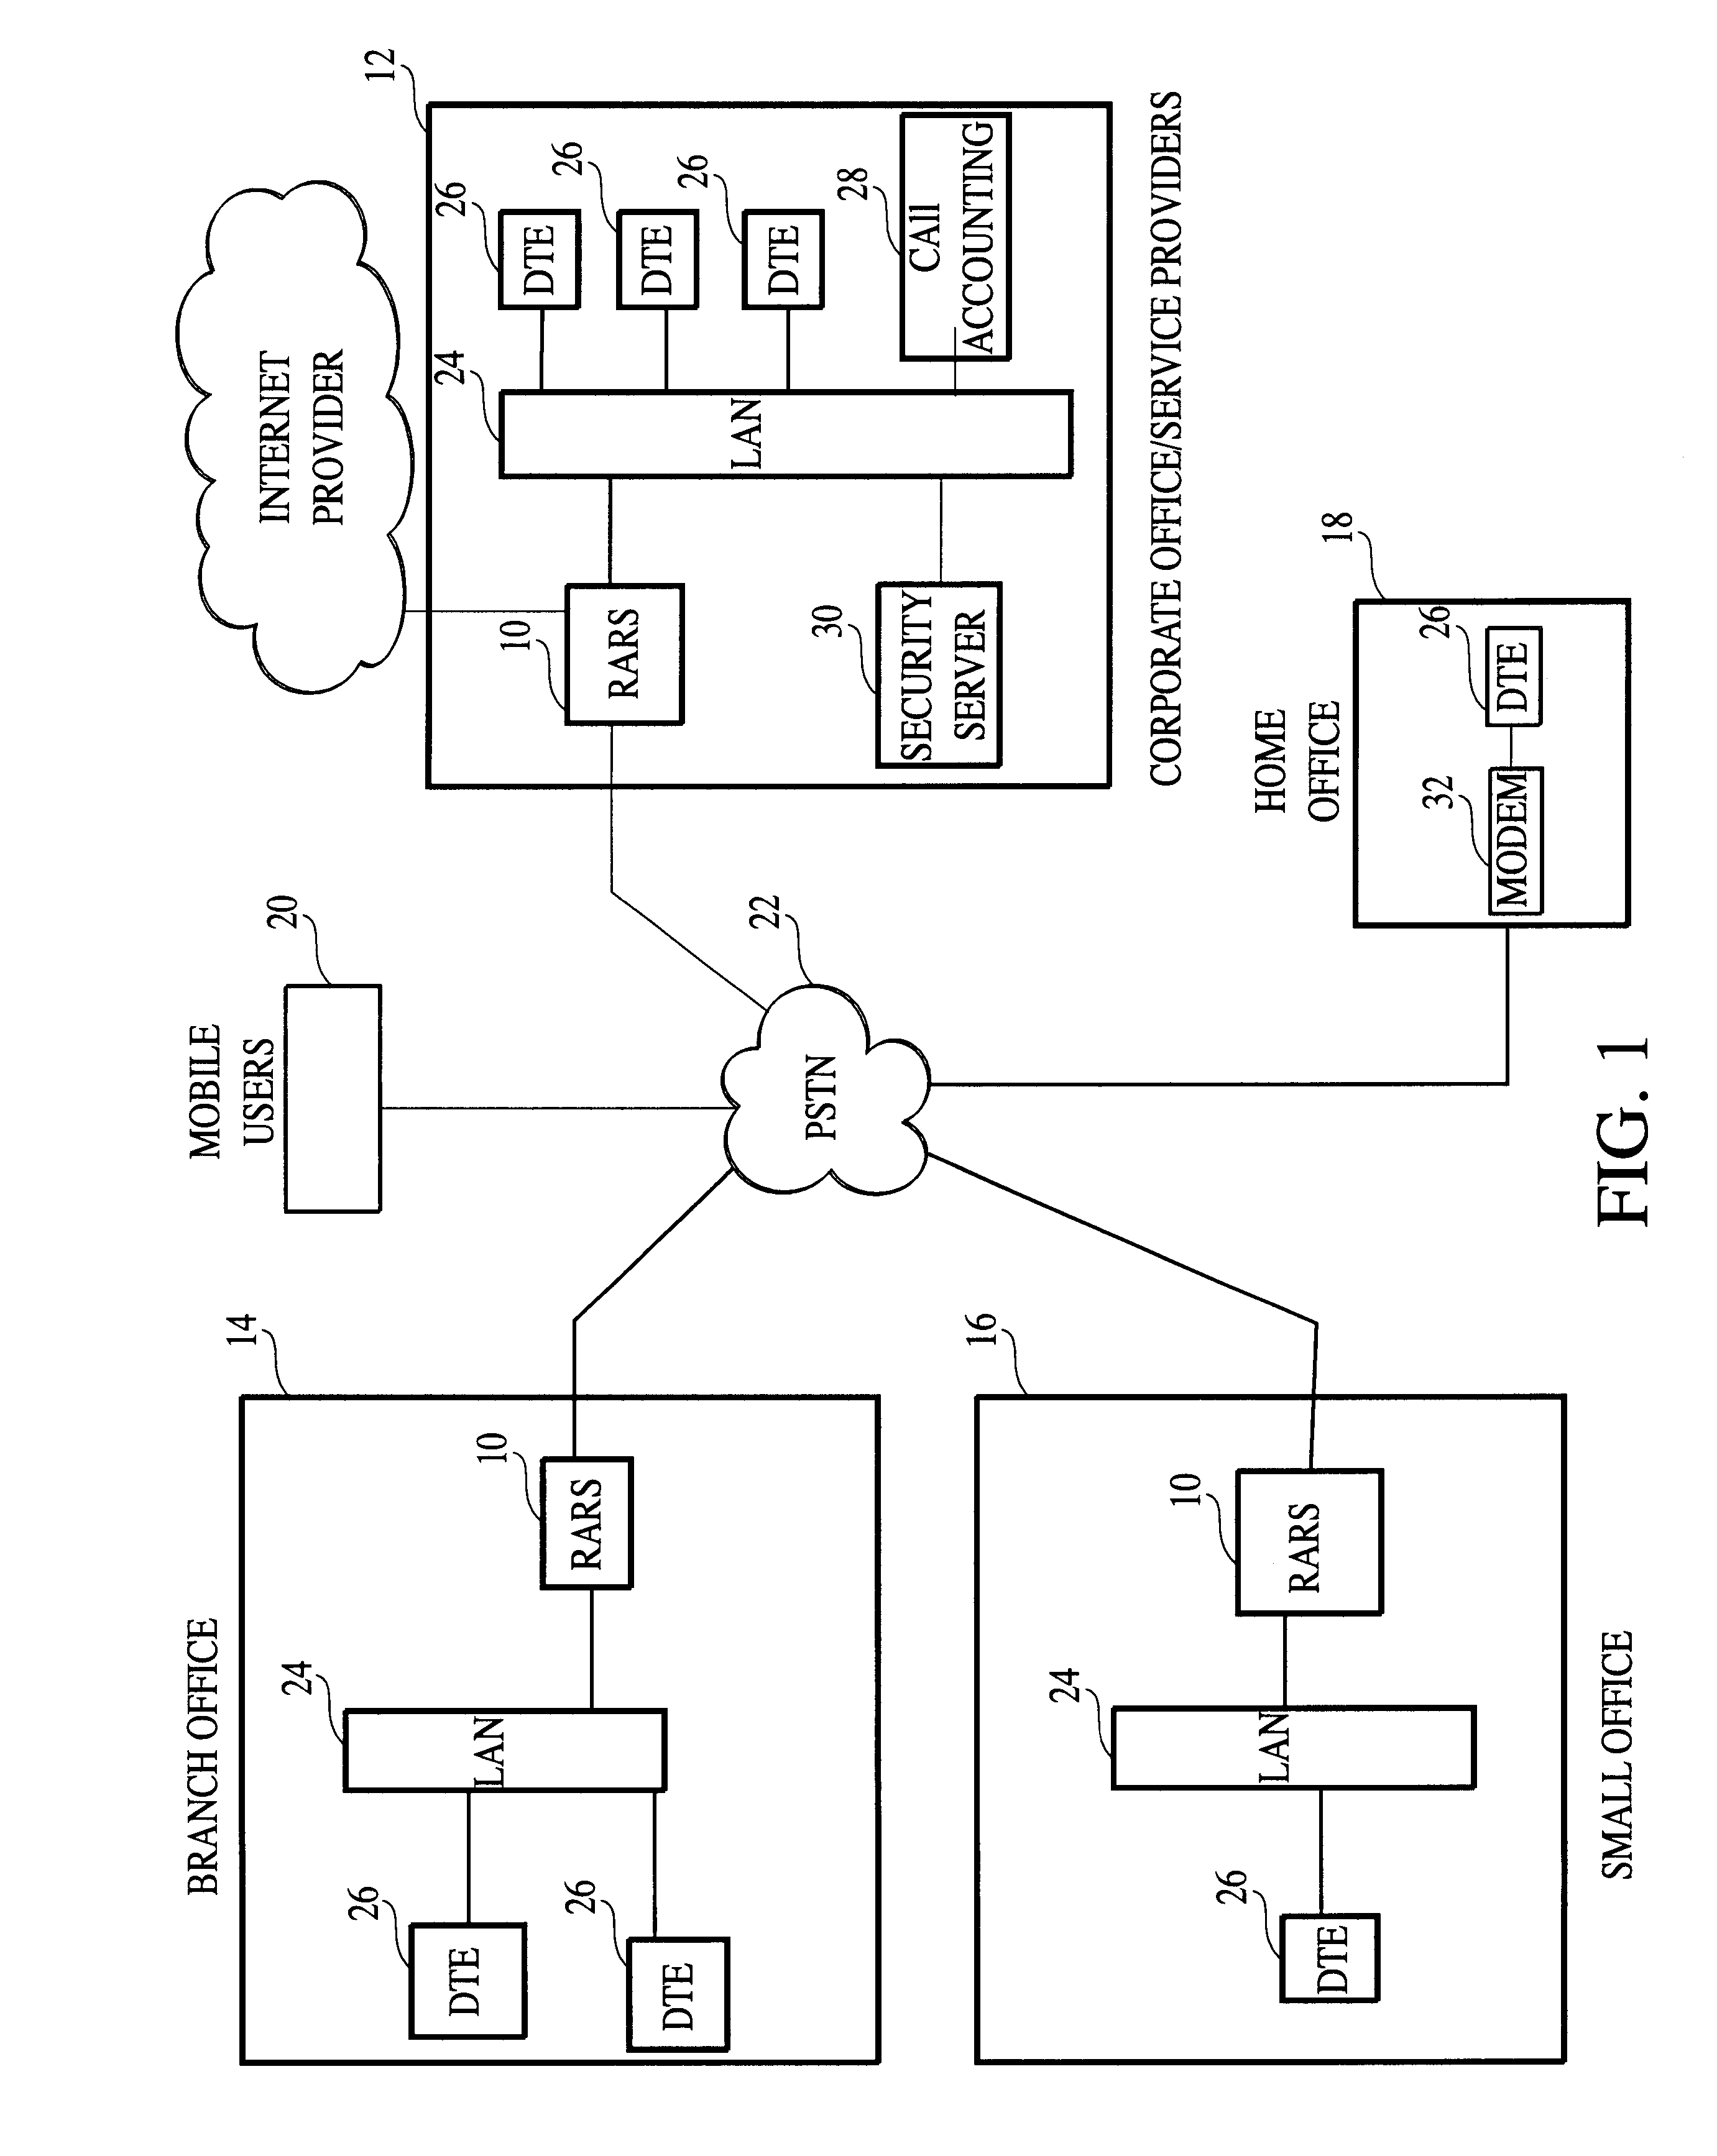 Power subsystem for a communication network containing a power bus